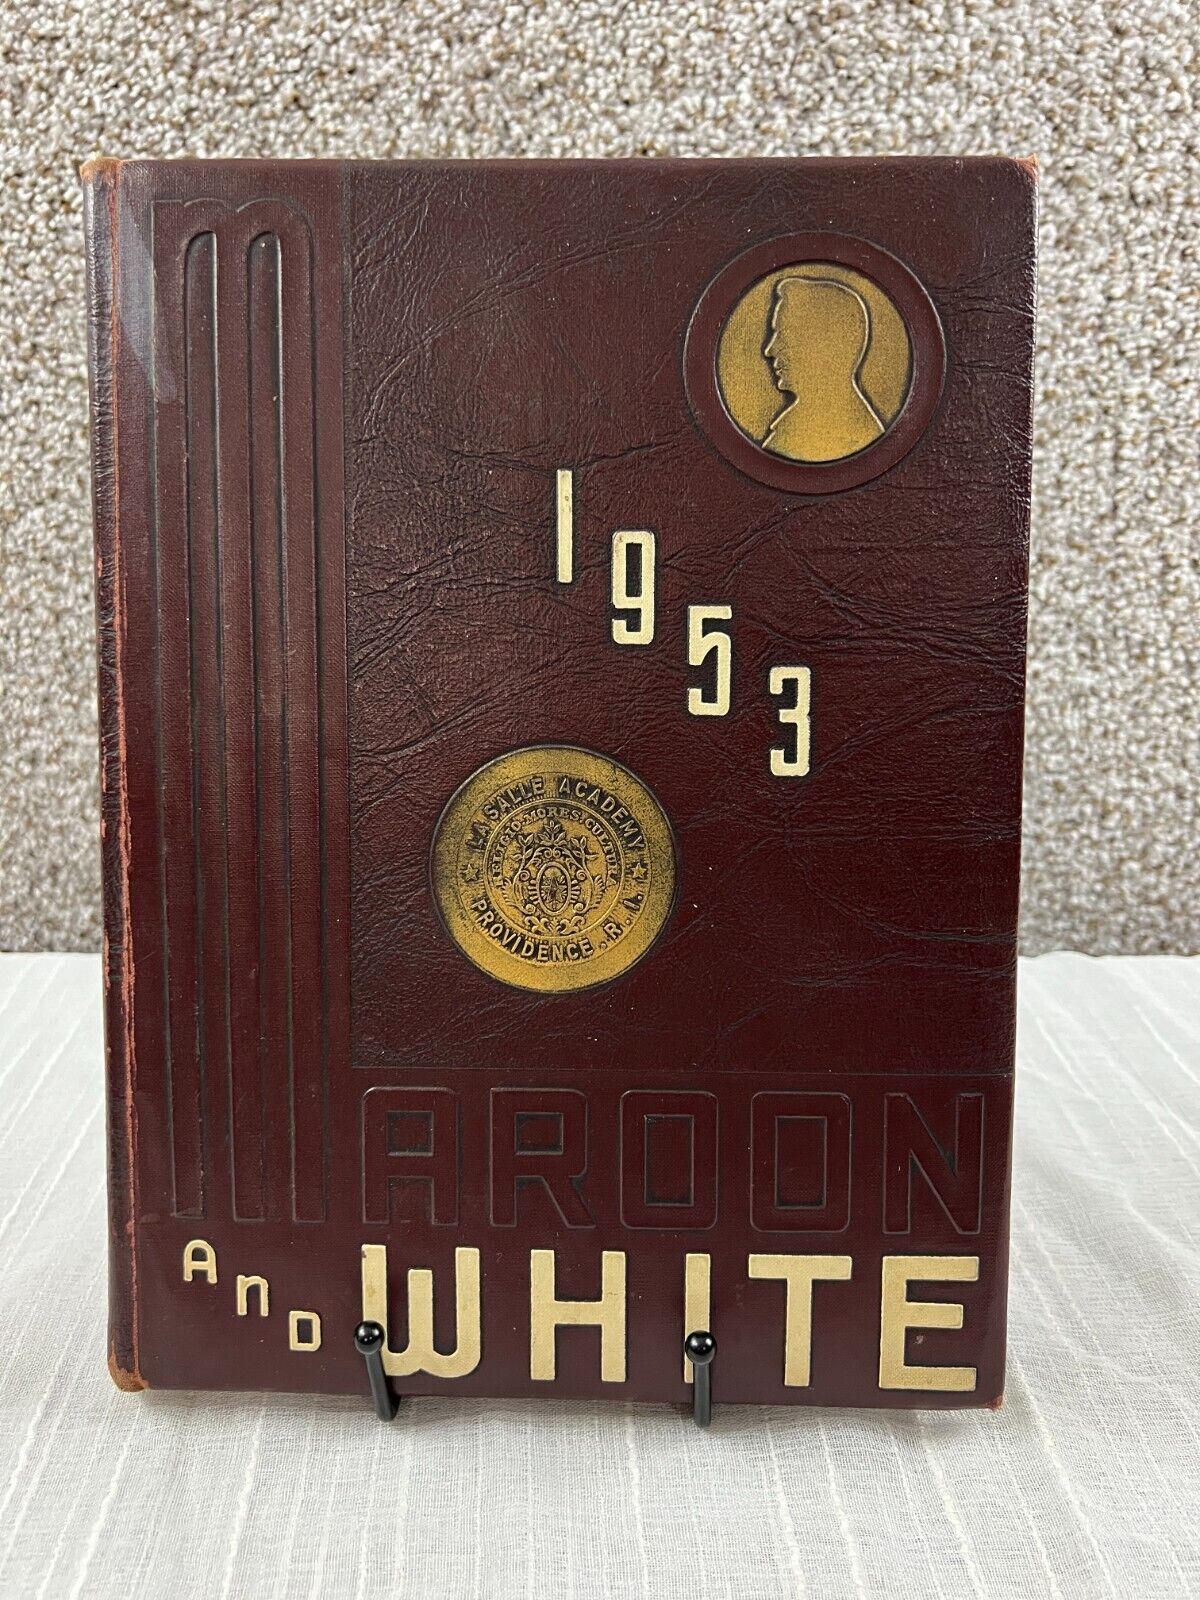 La Salle Academy Maroon and White 1953 Yearbook Providence, RI